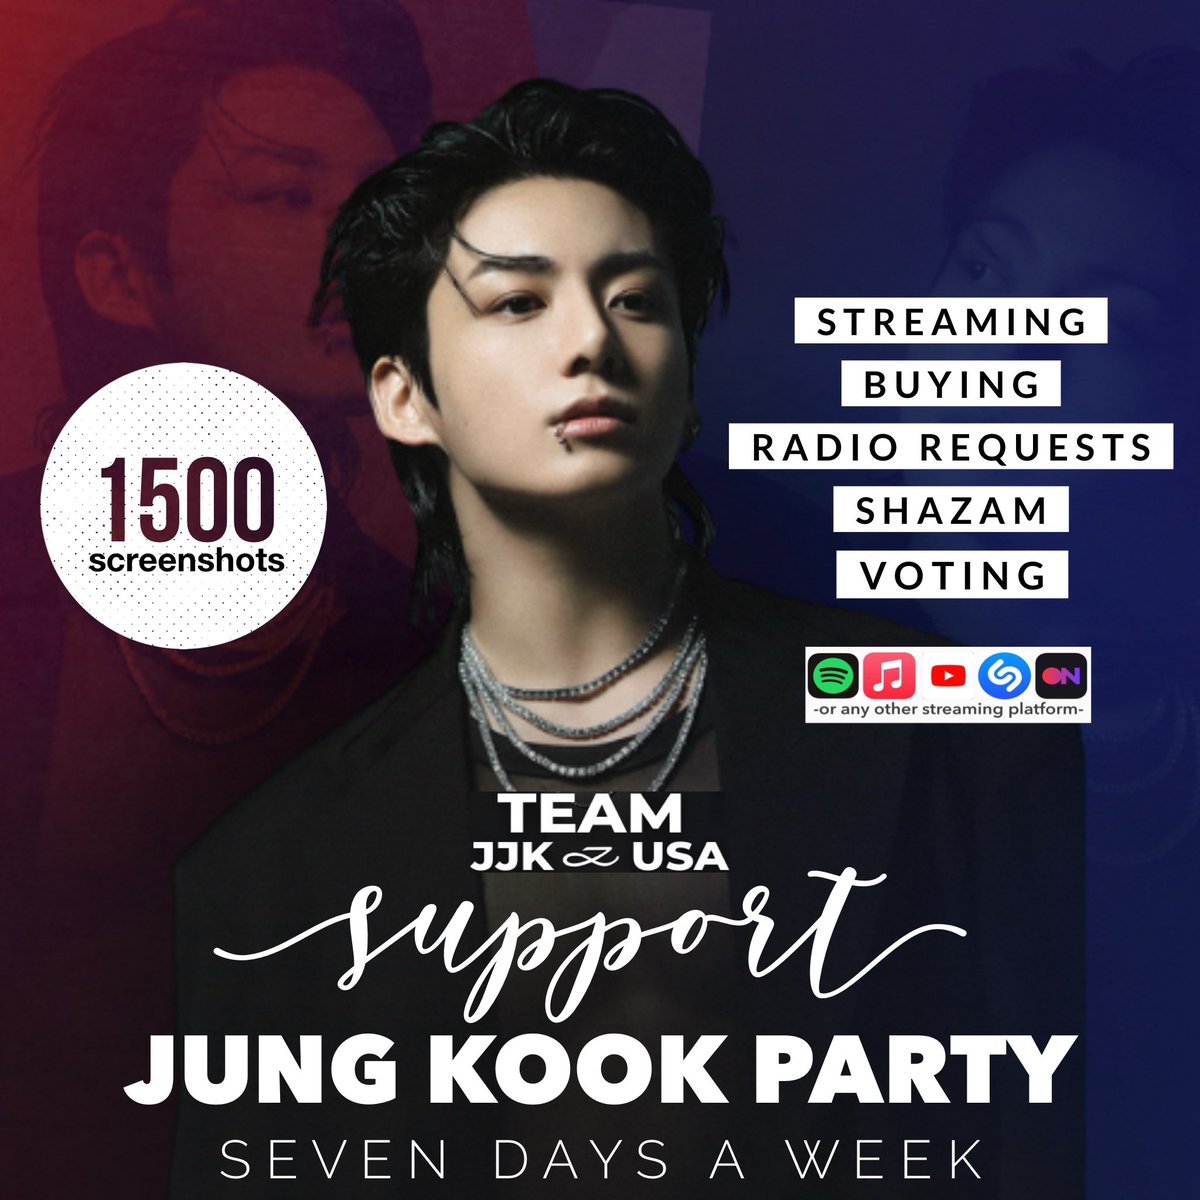 📀 SUPPORT •JUNGKOOK• DAILY PARTY 📀 🎯 GOAL 1️⃣5️⃣0️⃣0️⃣ SS We need to support Jungkook in all areas! DROP *NEW* SS FROM:  • Streaming  • Buying (receipts) • Radio tasks • Shazam • Votes ▫️STREAM SNTY + SNTY Remixes, Seven, 3D & GOLDEN, from any platform - including